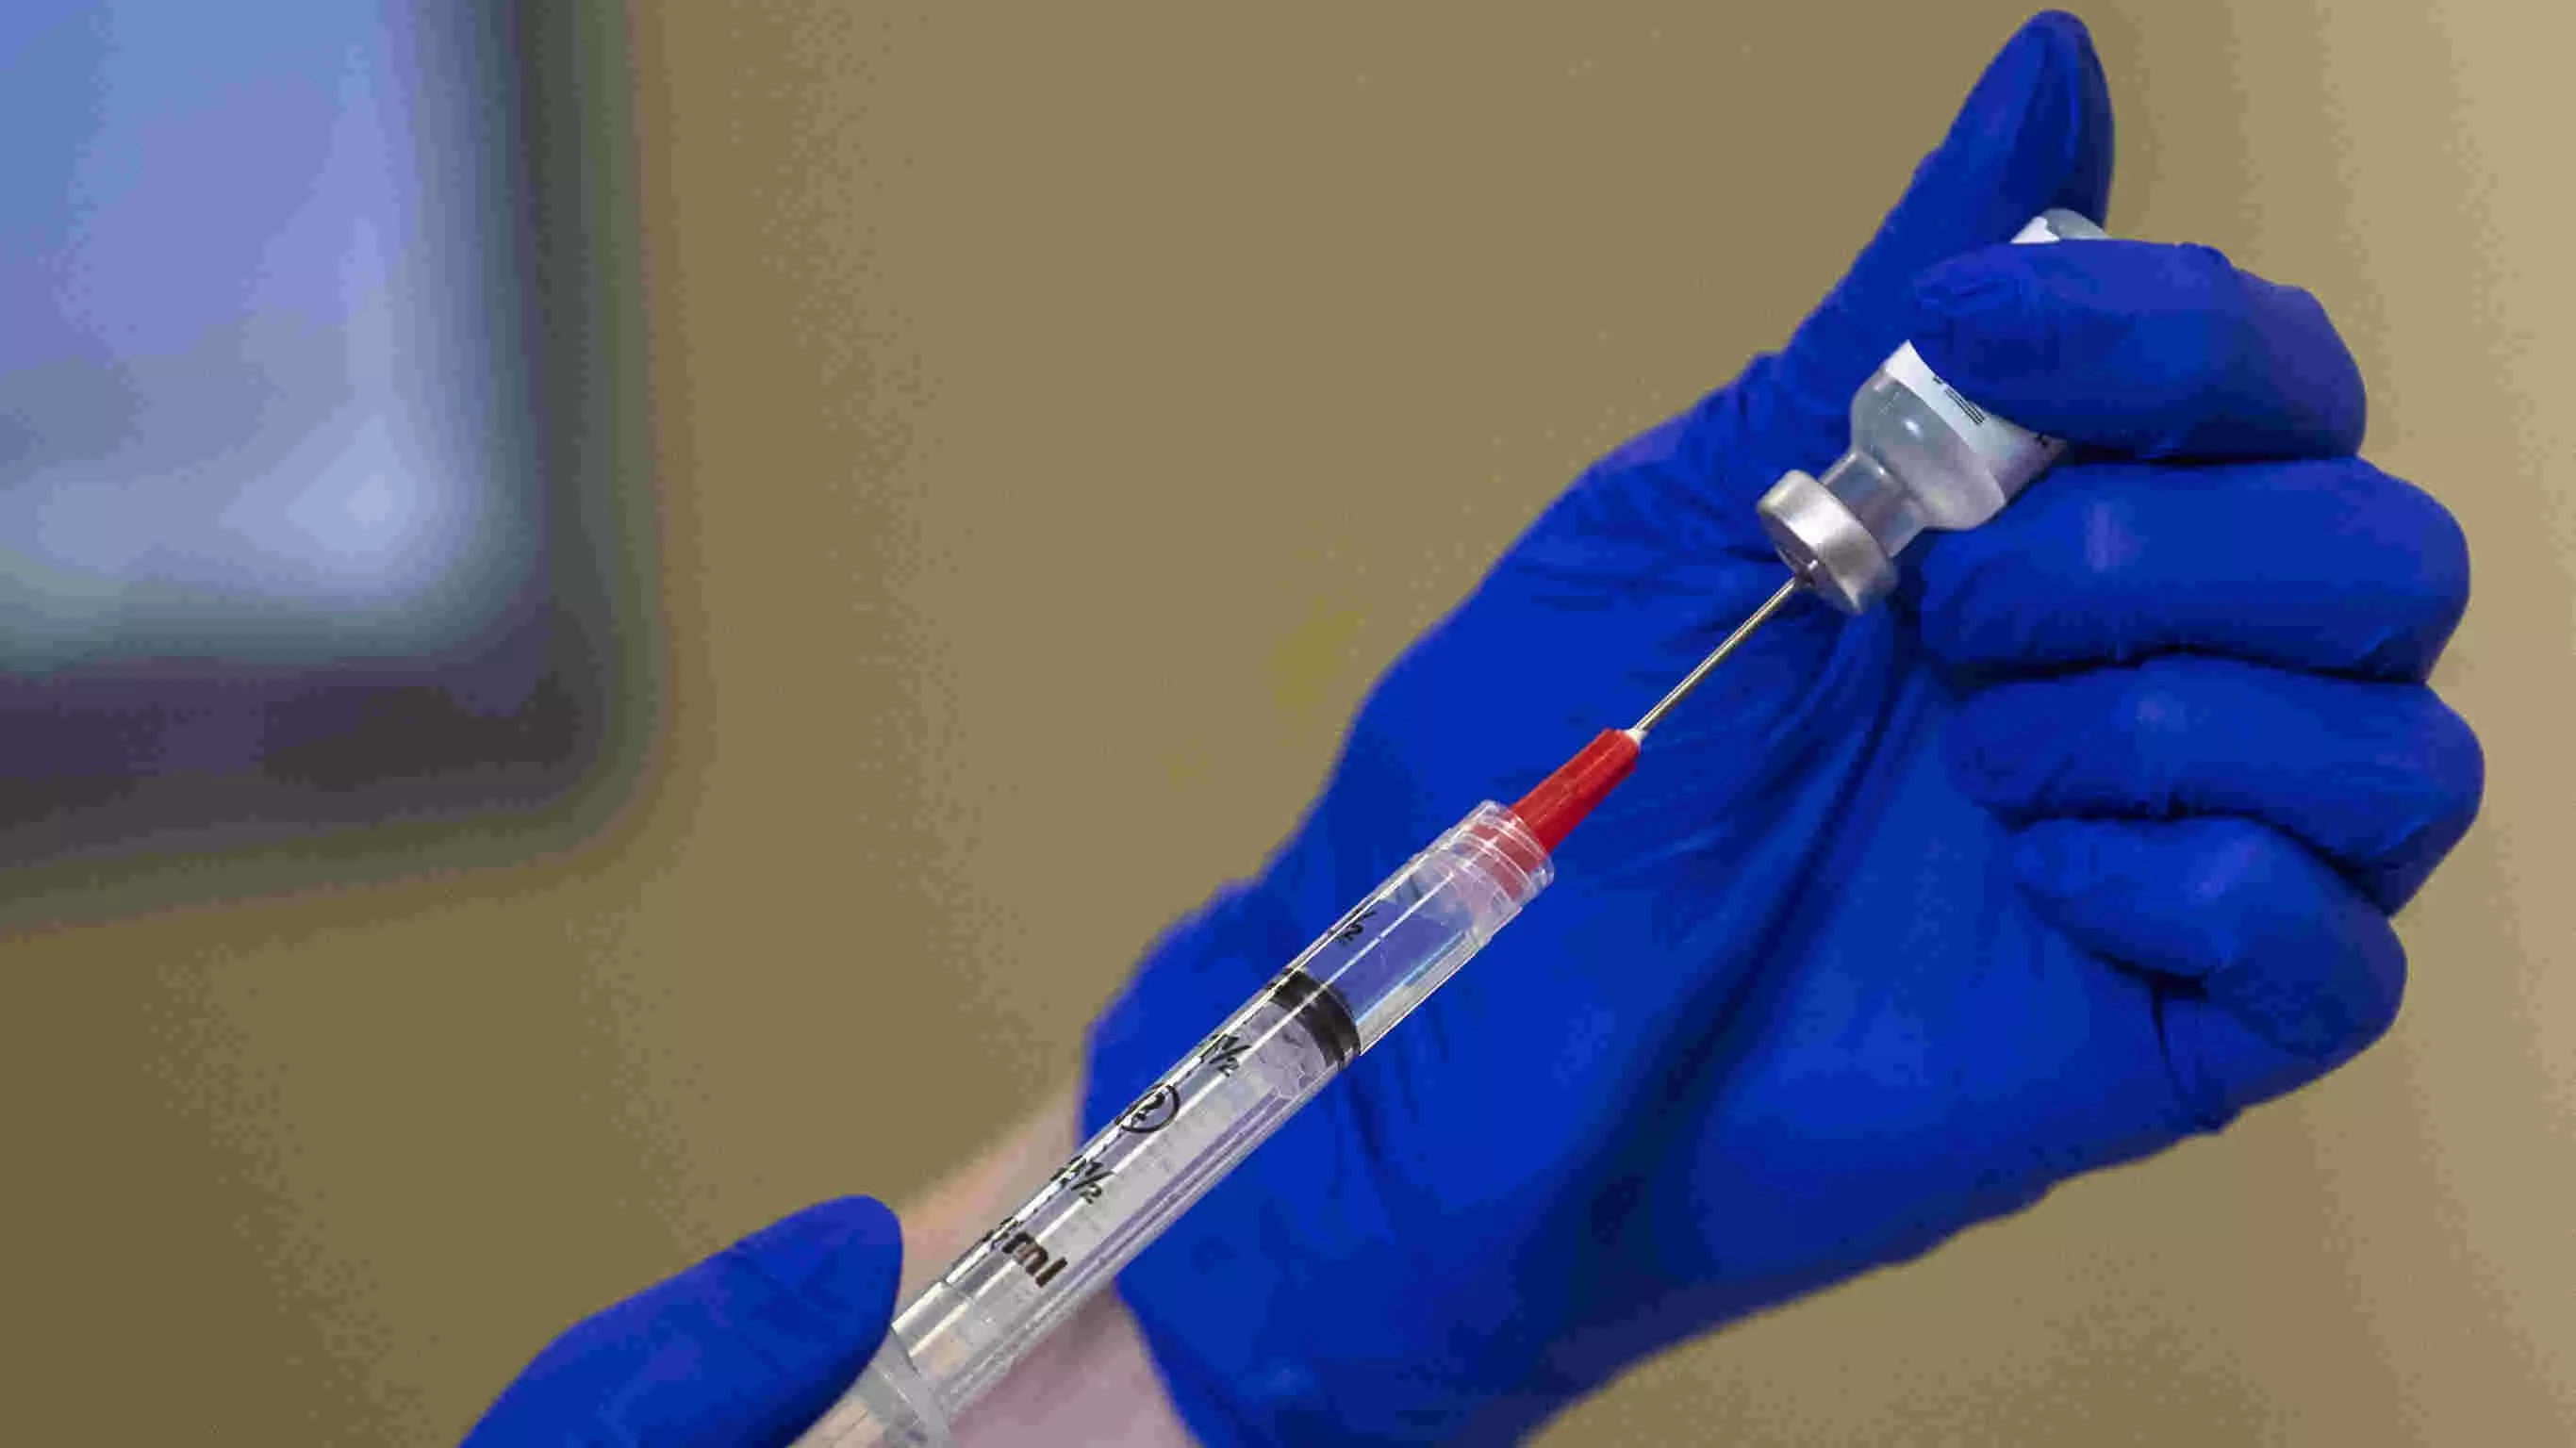 COVID -19 vaccine can’t alter human DNA – Expert